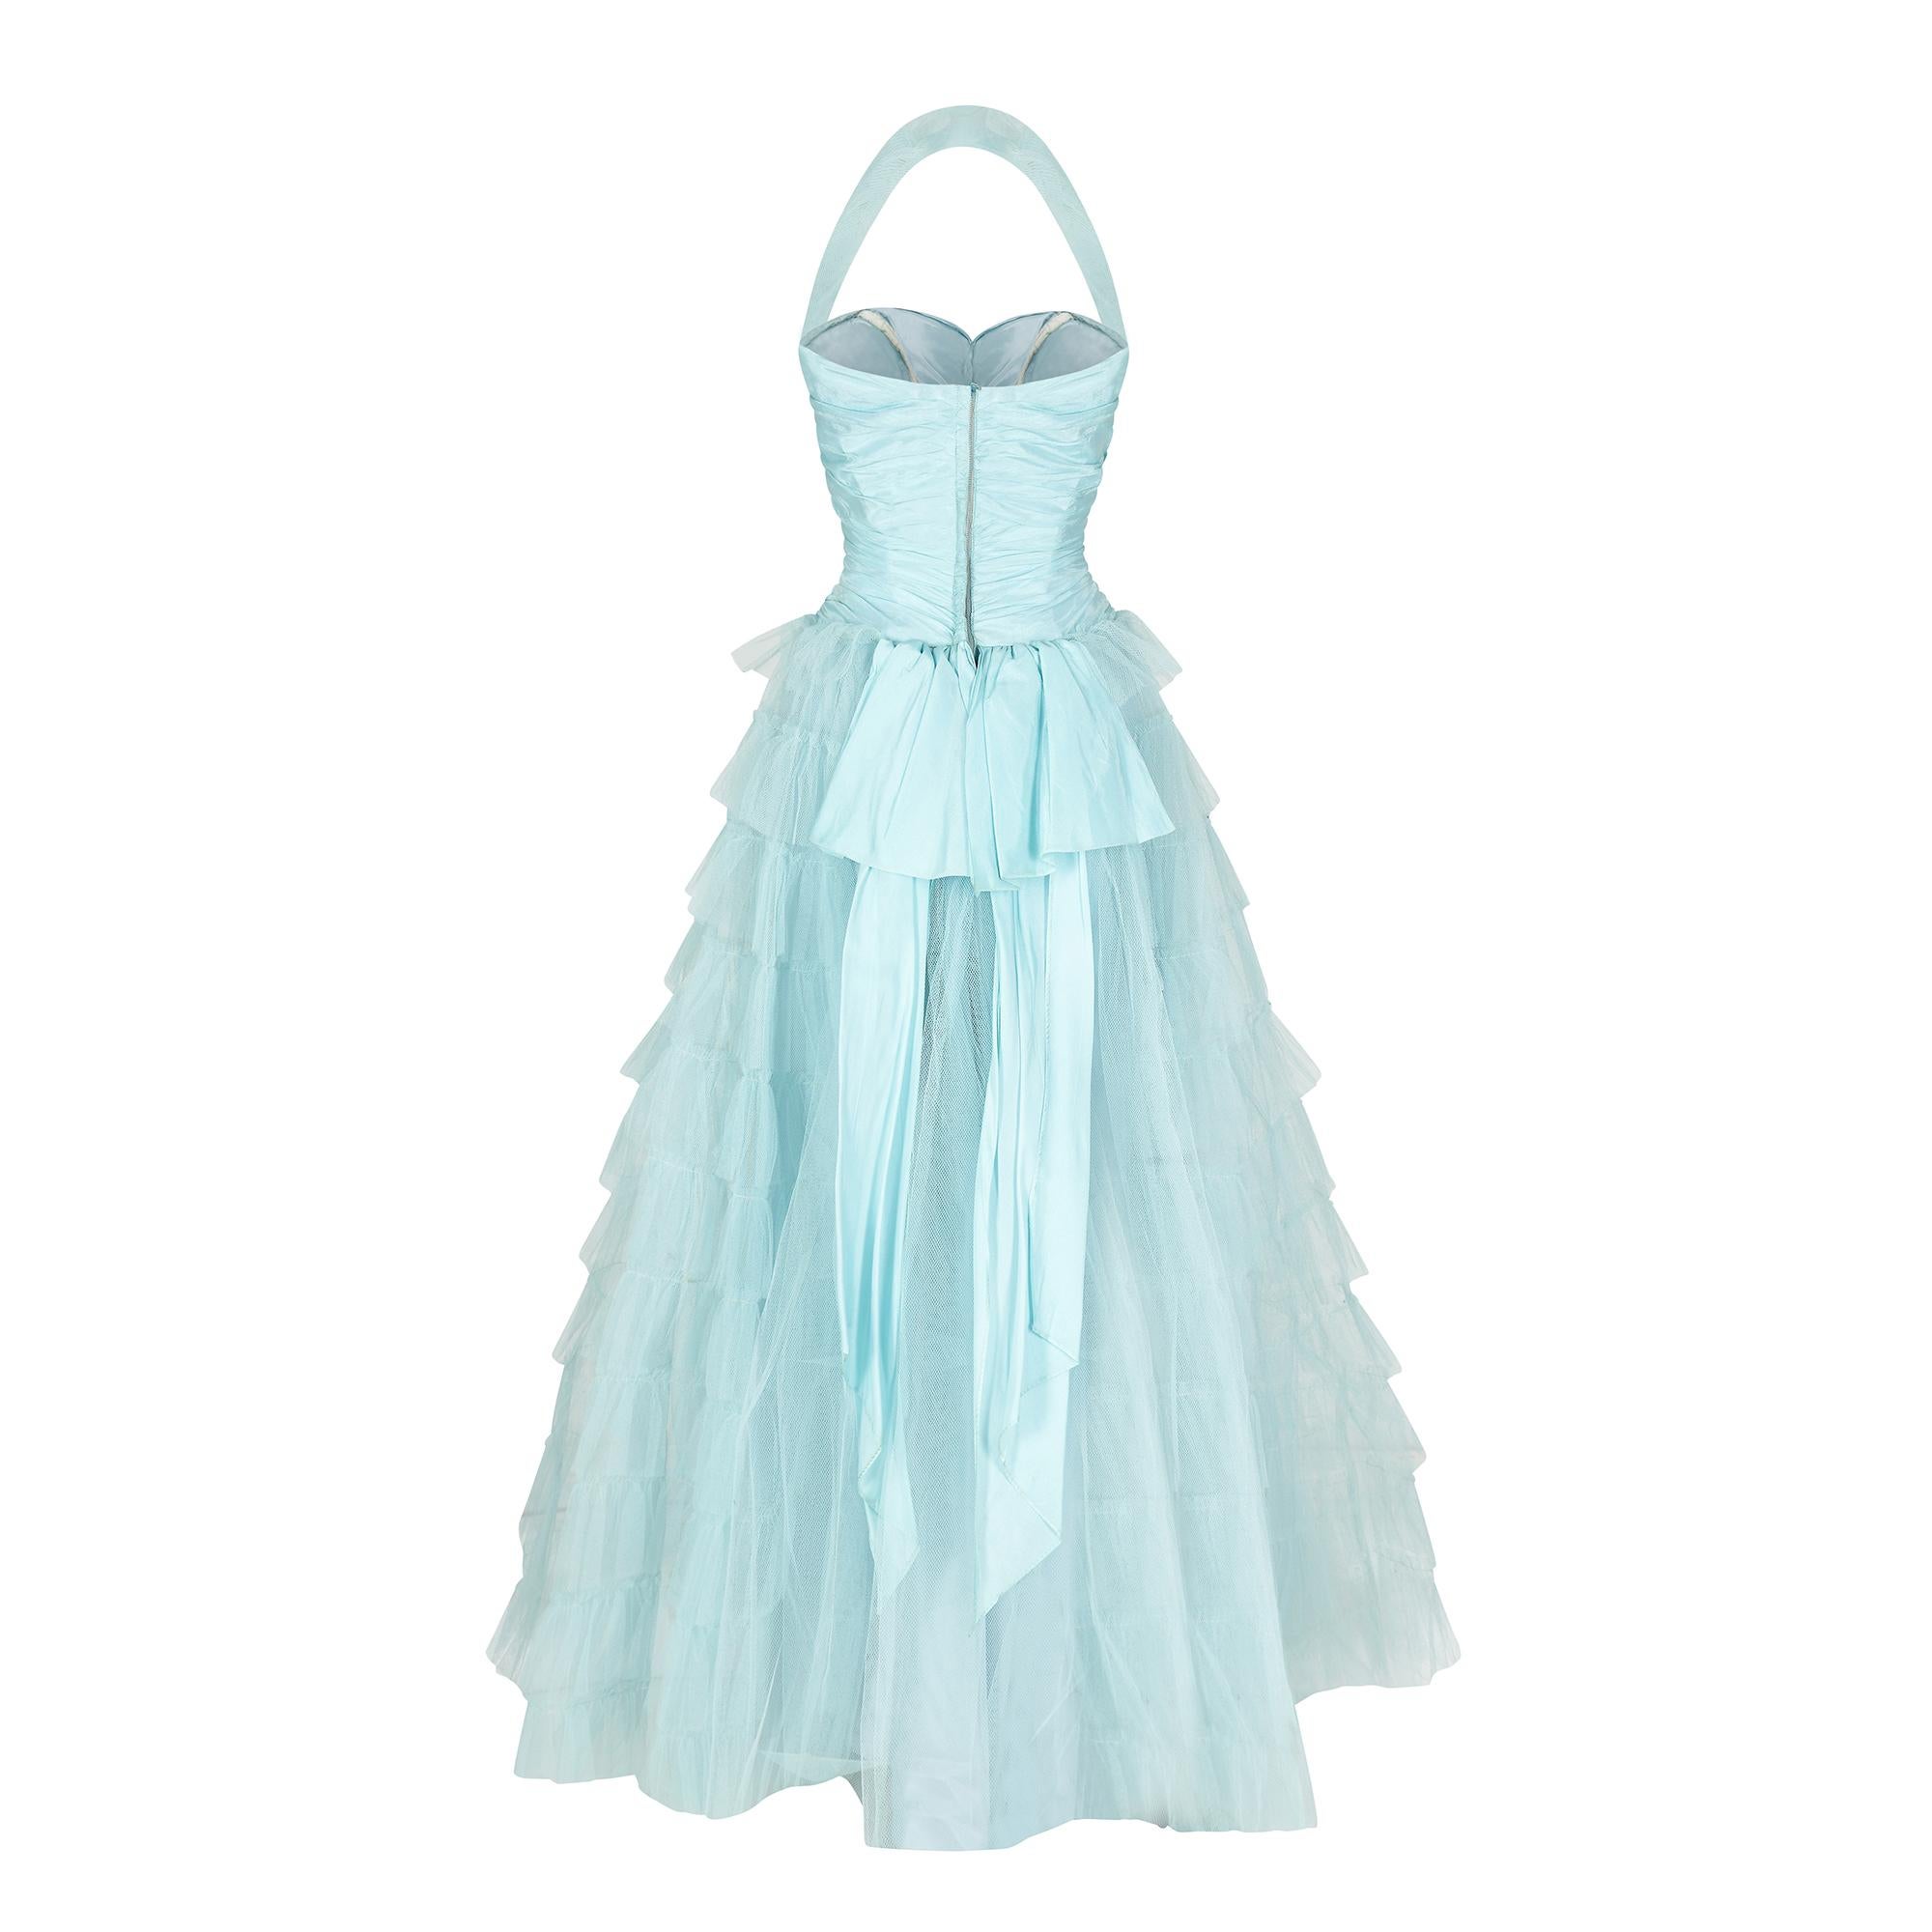 This original 1950s turquoise and net prom dress is a real show-stopping, fairy tale piece. It reminds us of the Disney Princess dress worn by Cinderella at the ball. 

There are three layers to the skirt; an acetate underskirt, over-laid with a